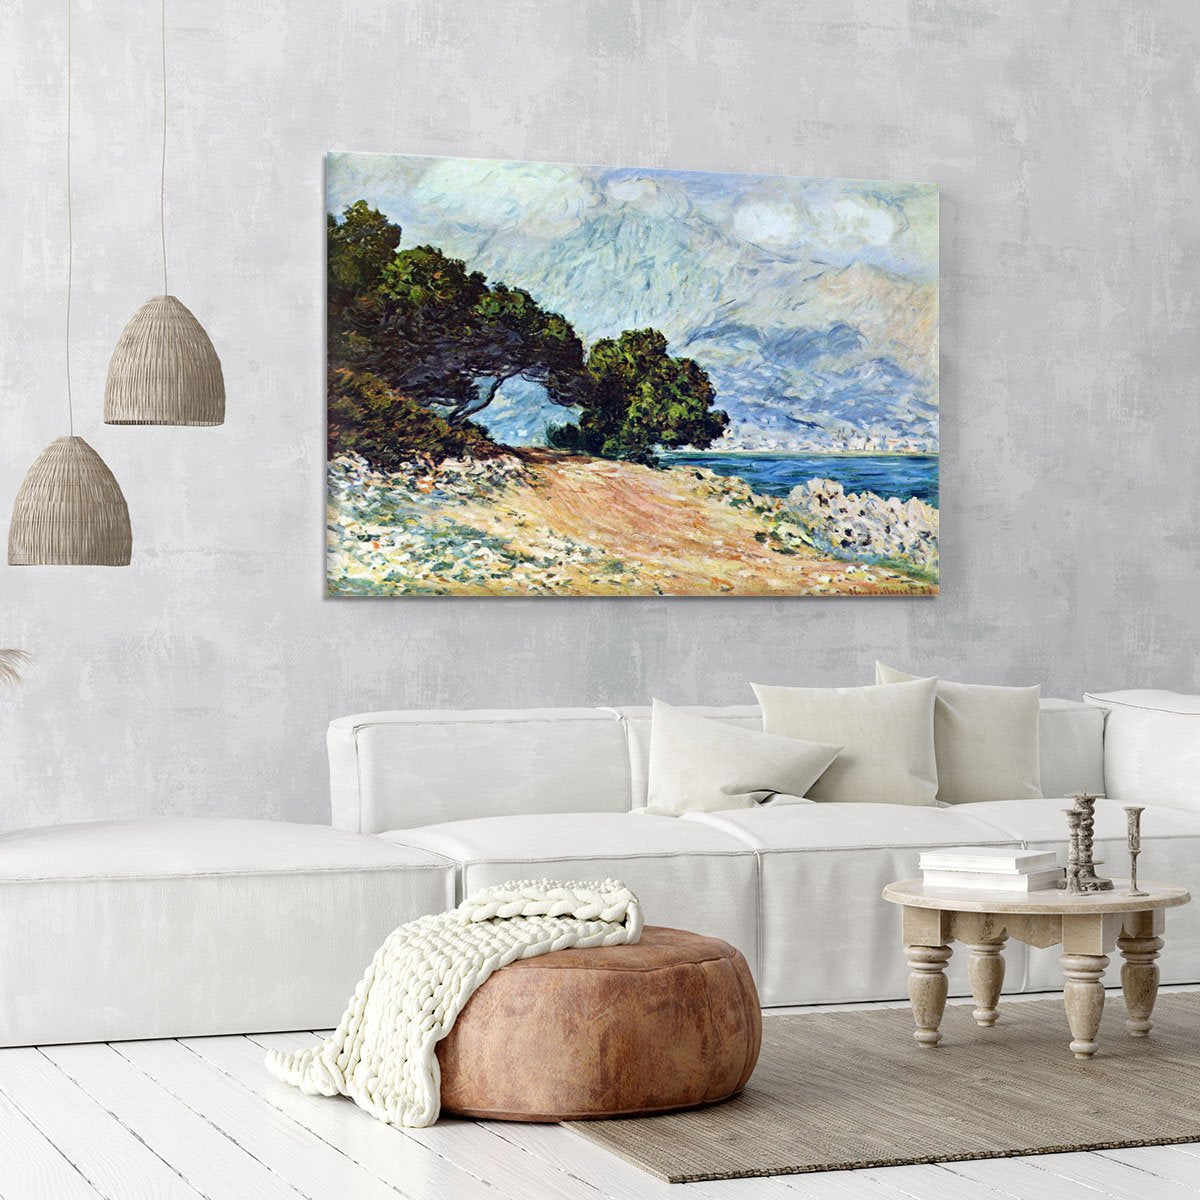 Cape Martin in Menton by Monet Canvas Print or Poster